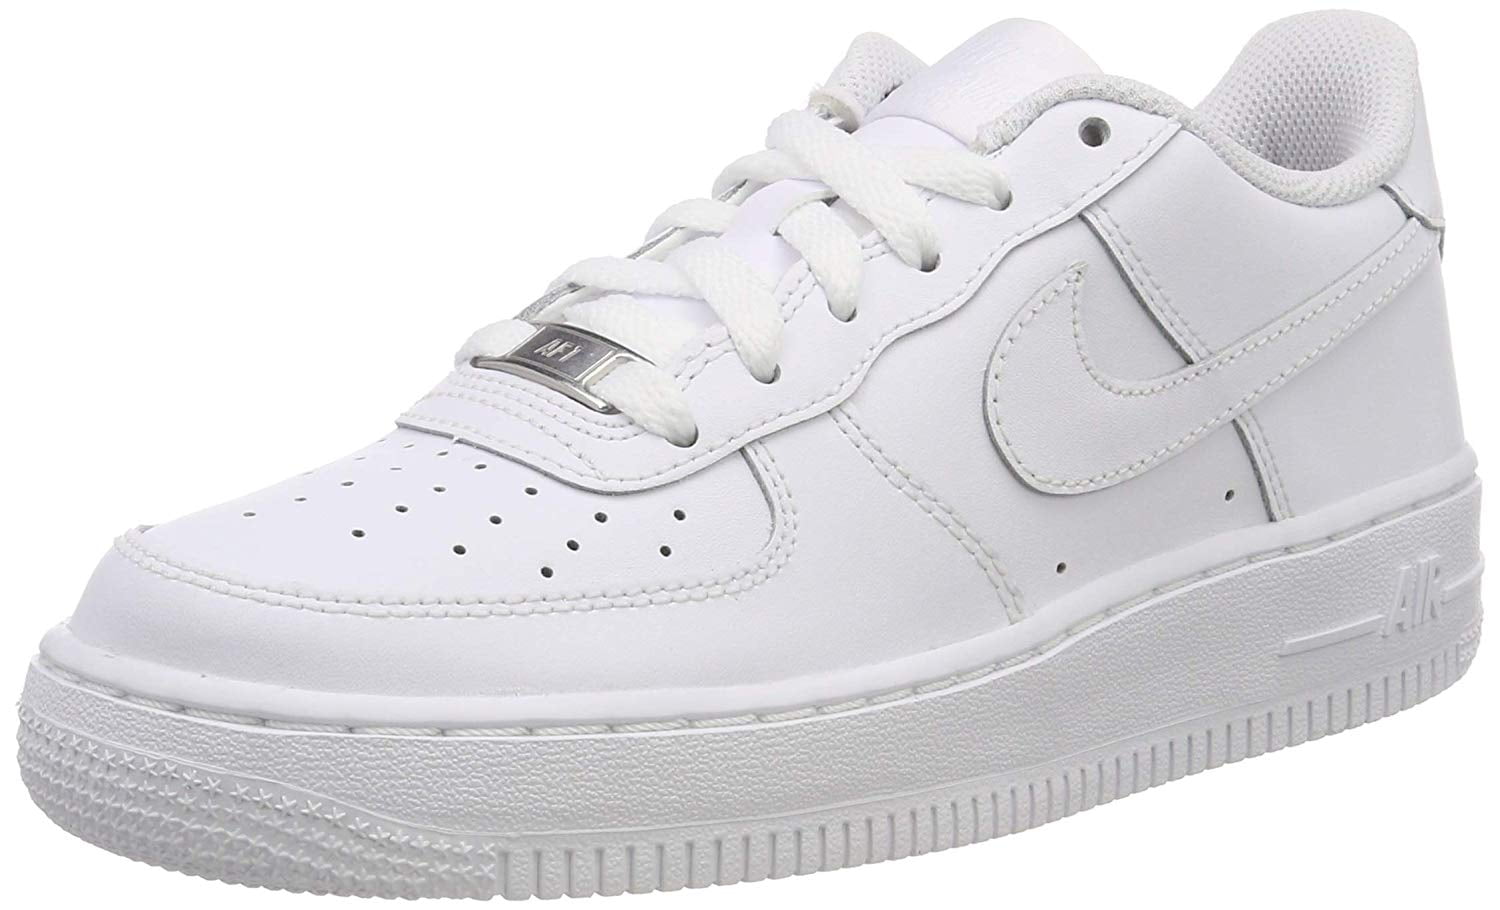 Nike Air Force AF-1 Low Kids Size 12C Athletic Shoe White Lace Up 314193-117